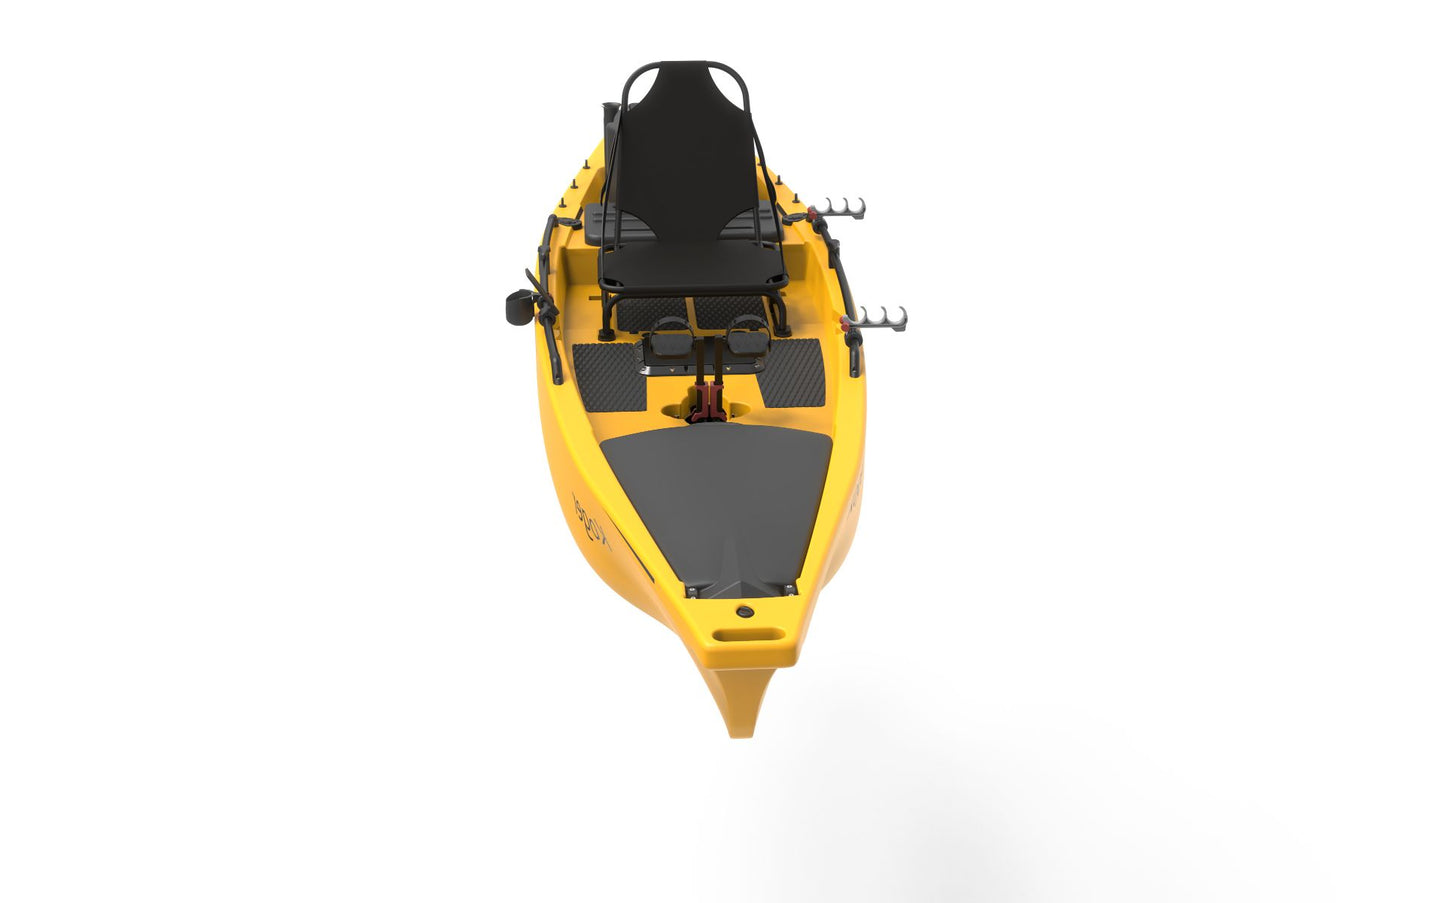  Koger 14 Foot Peddle Fishing Kayak with Live Well, 360 Degree Seat, and Accessories. Bow View